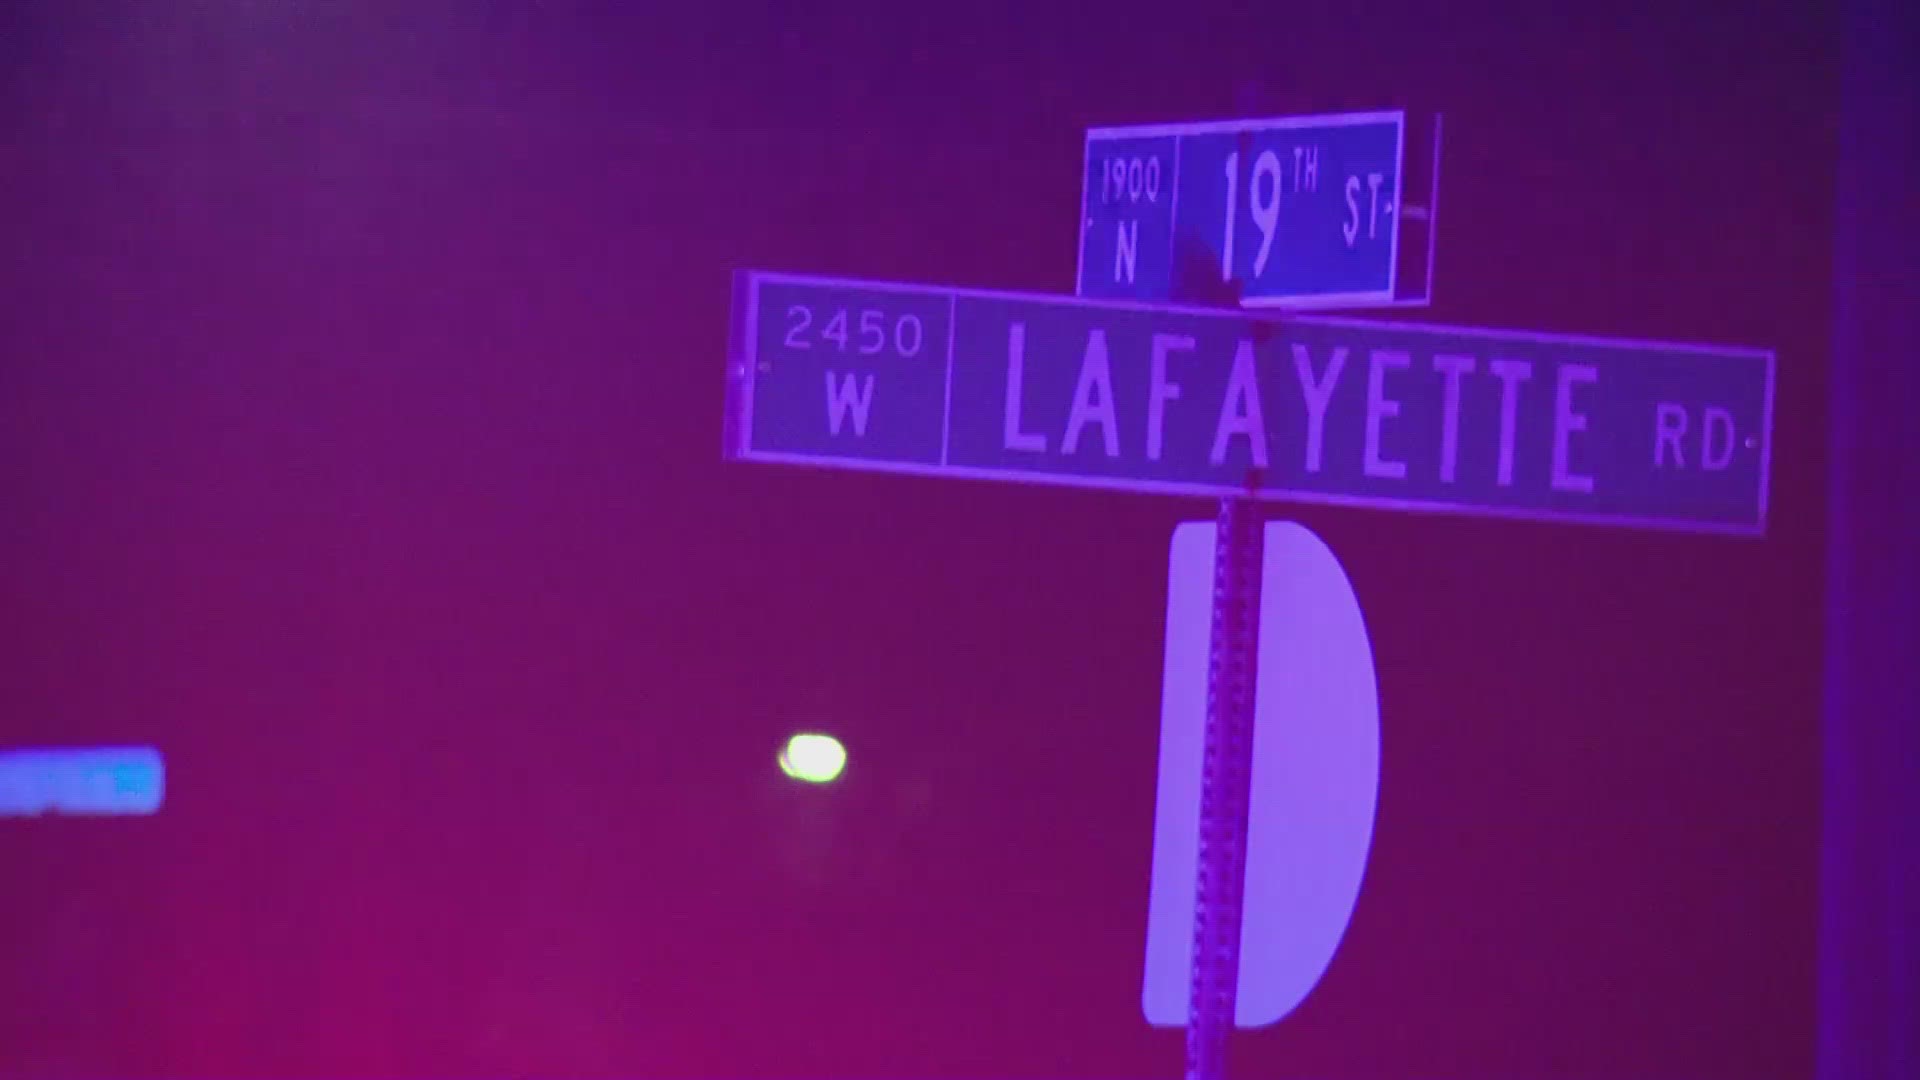 IMPD were called to the area near 19th Street and Lafayette Road just before 6:30 a.m. Christmas Eve.